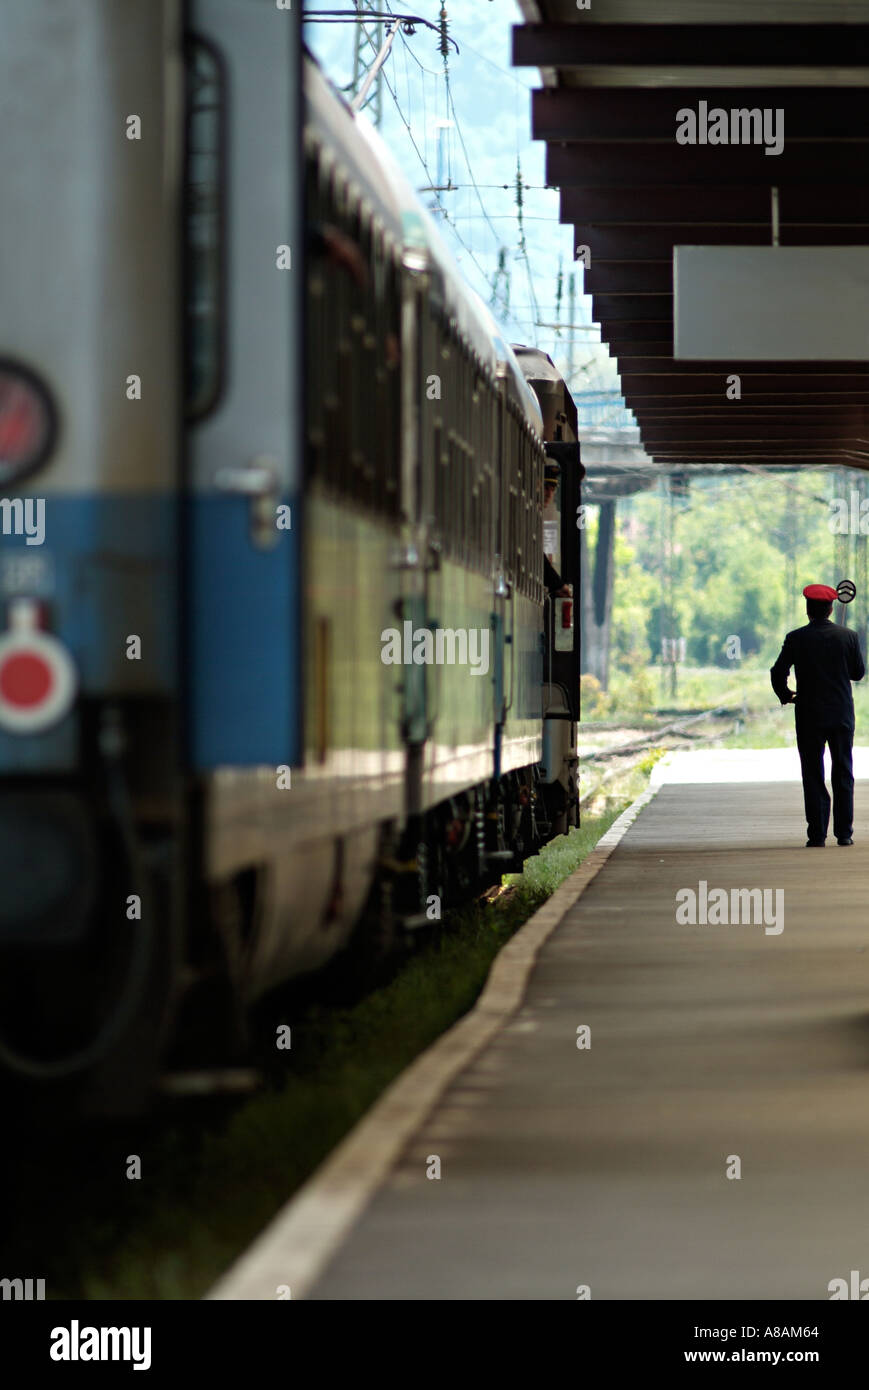 Railway Station Master on the Platform Next to a Train Carriage. Stock Photo